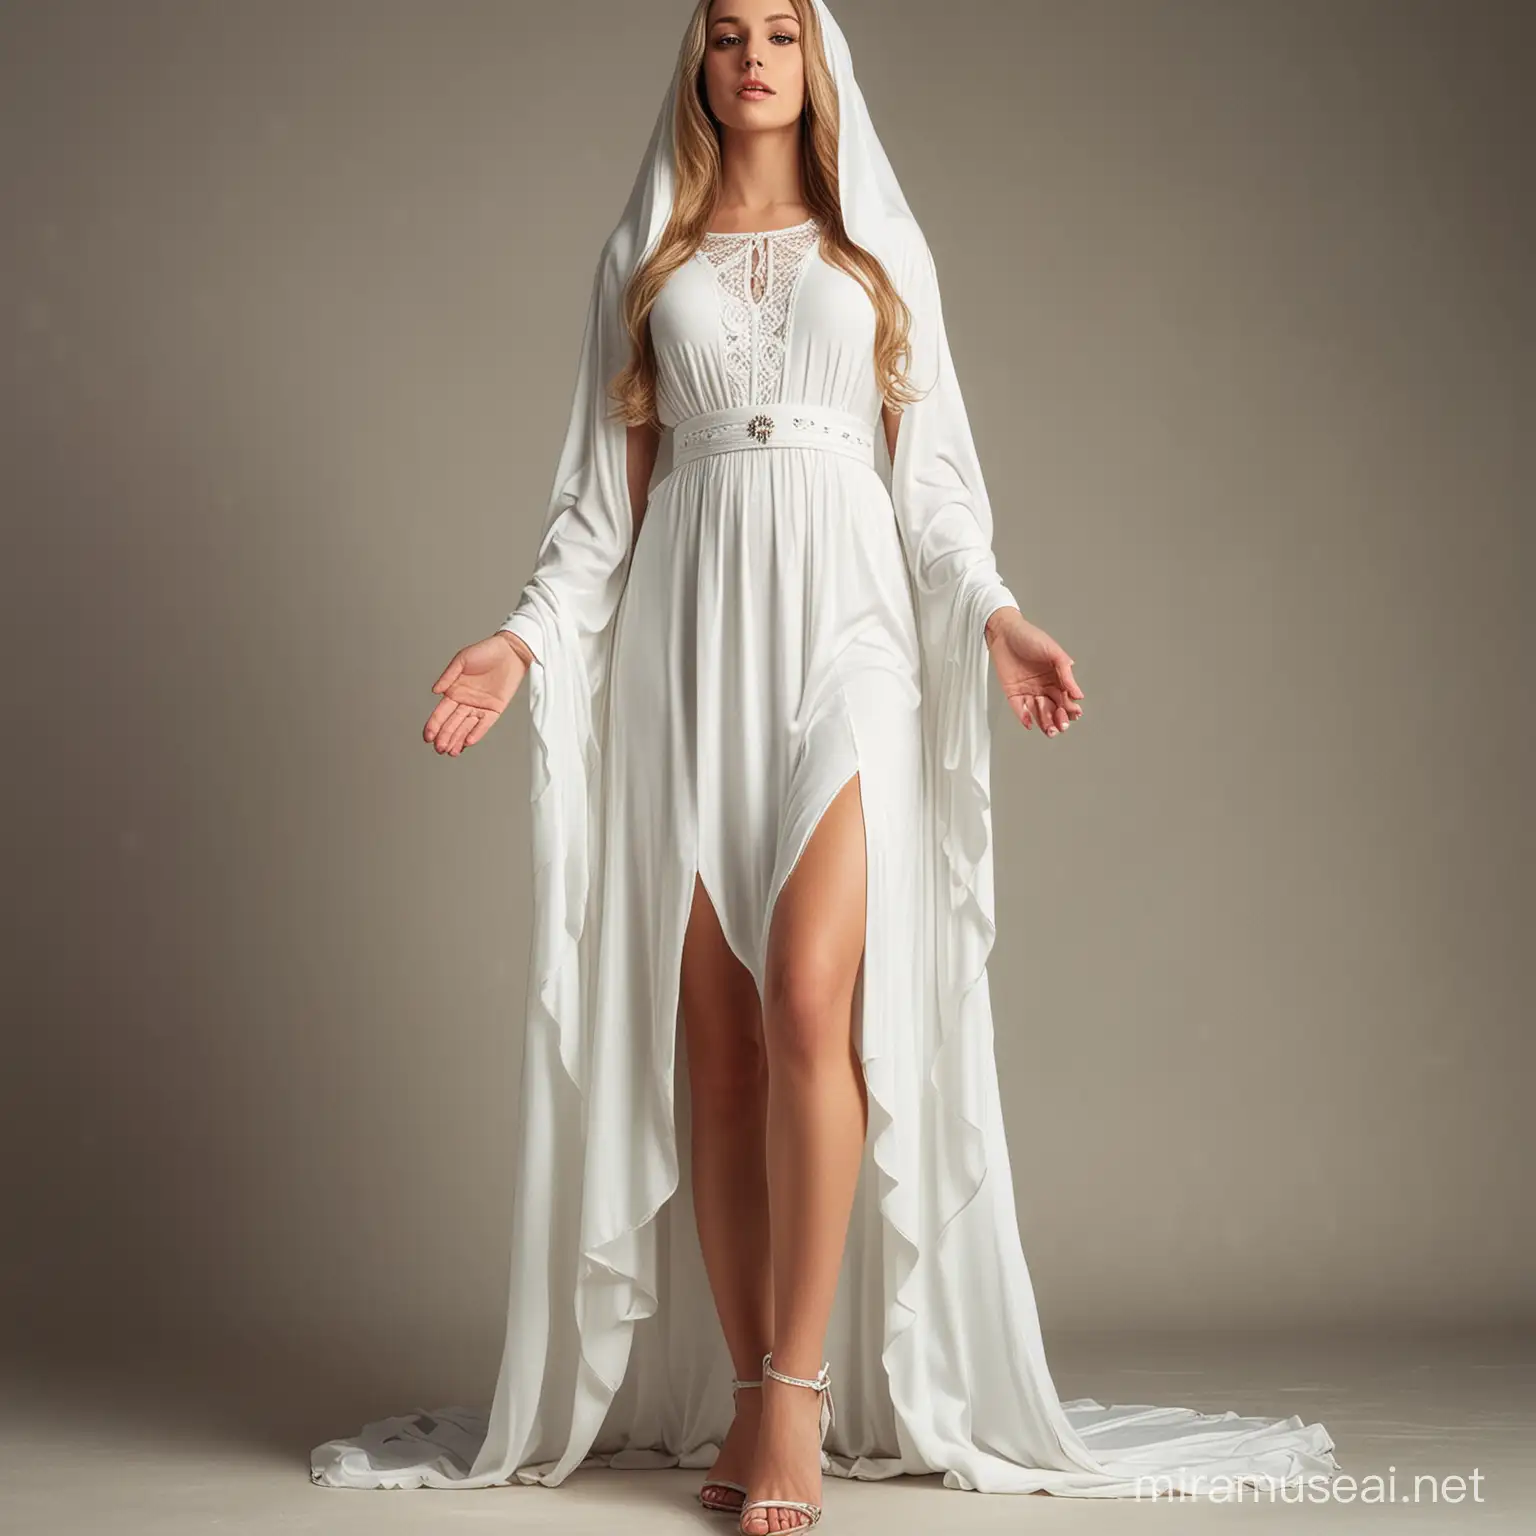 Ethereal Virgin Mary in White Dress A Heavenly Vision of Grace